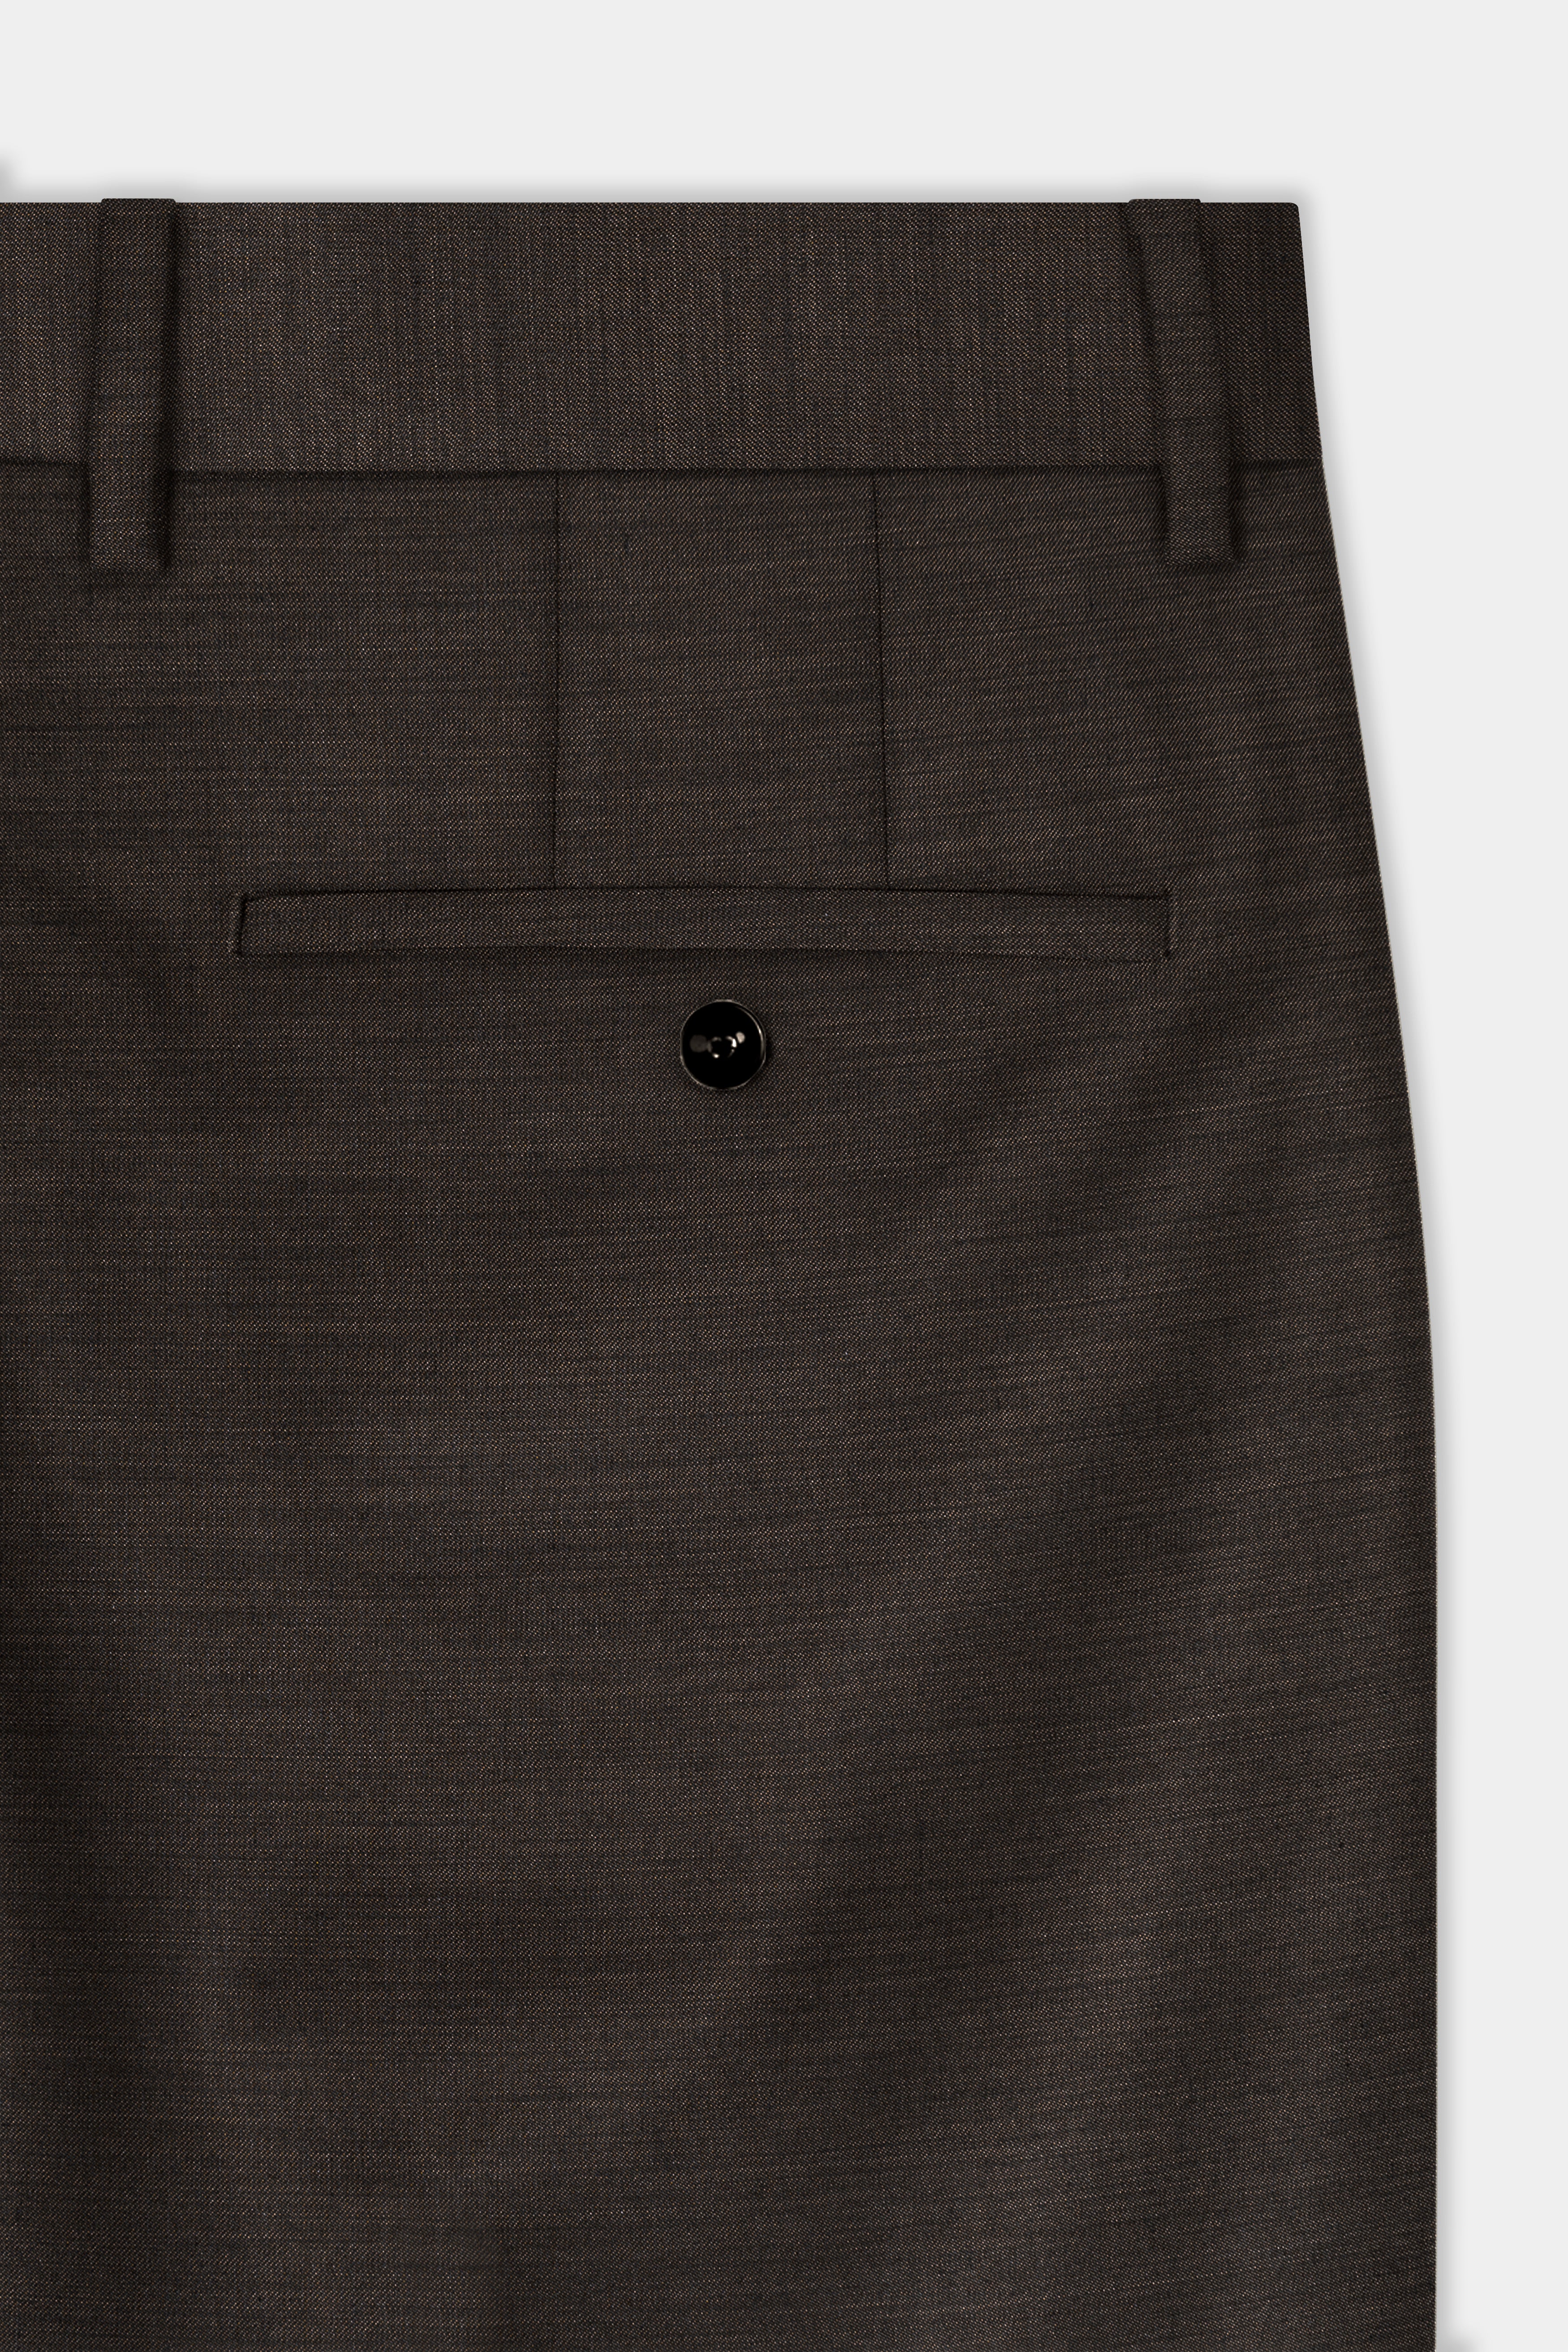 Eclipse Brown Textured Wool Blend Pant